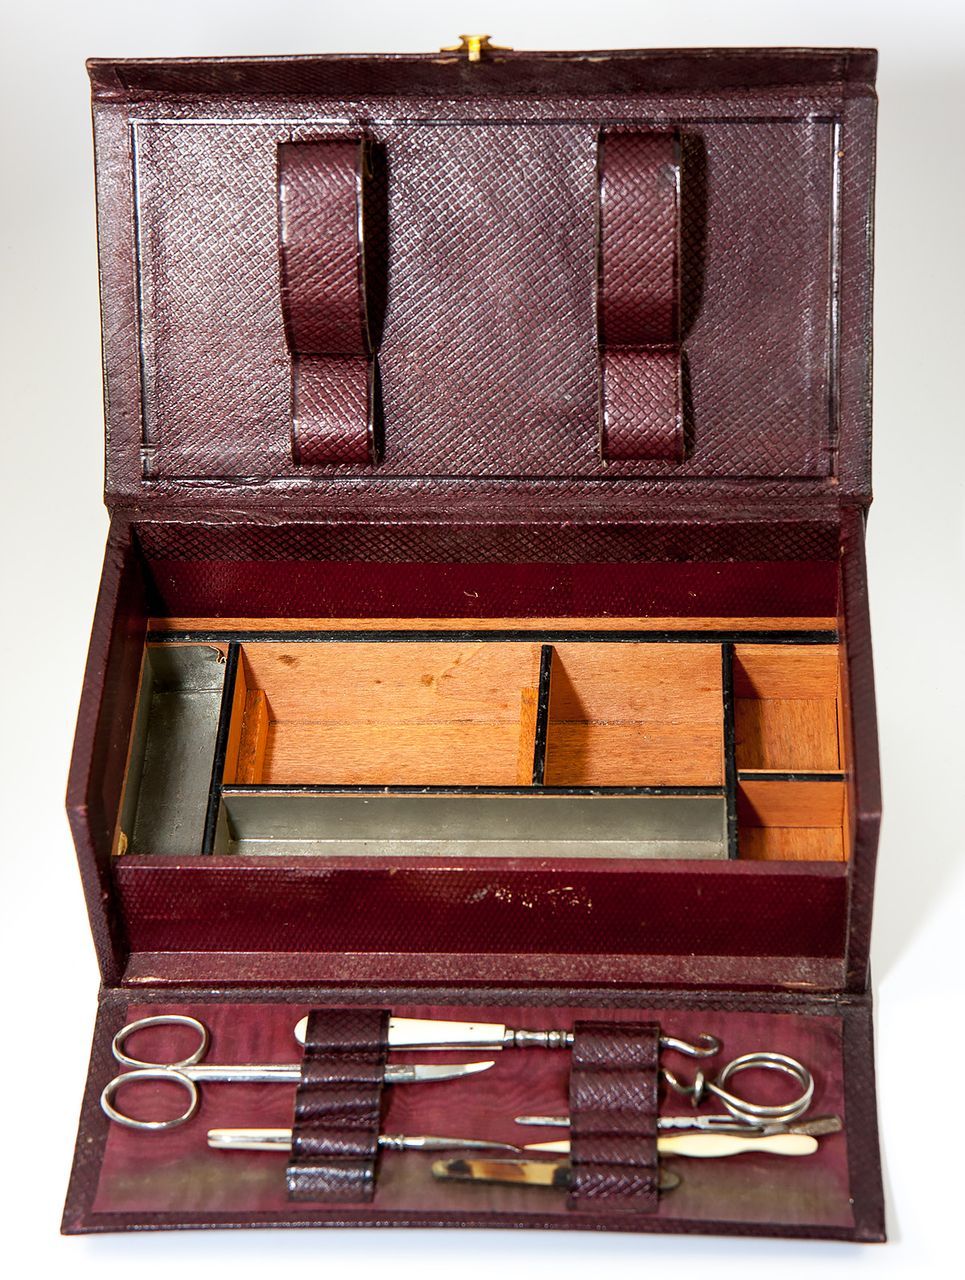 Antique French Early 19th C. Leather Grand Tour Traveler's Vanity Set, Necessaire, Incomplete